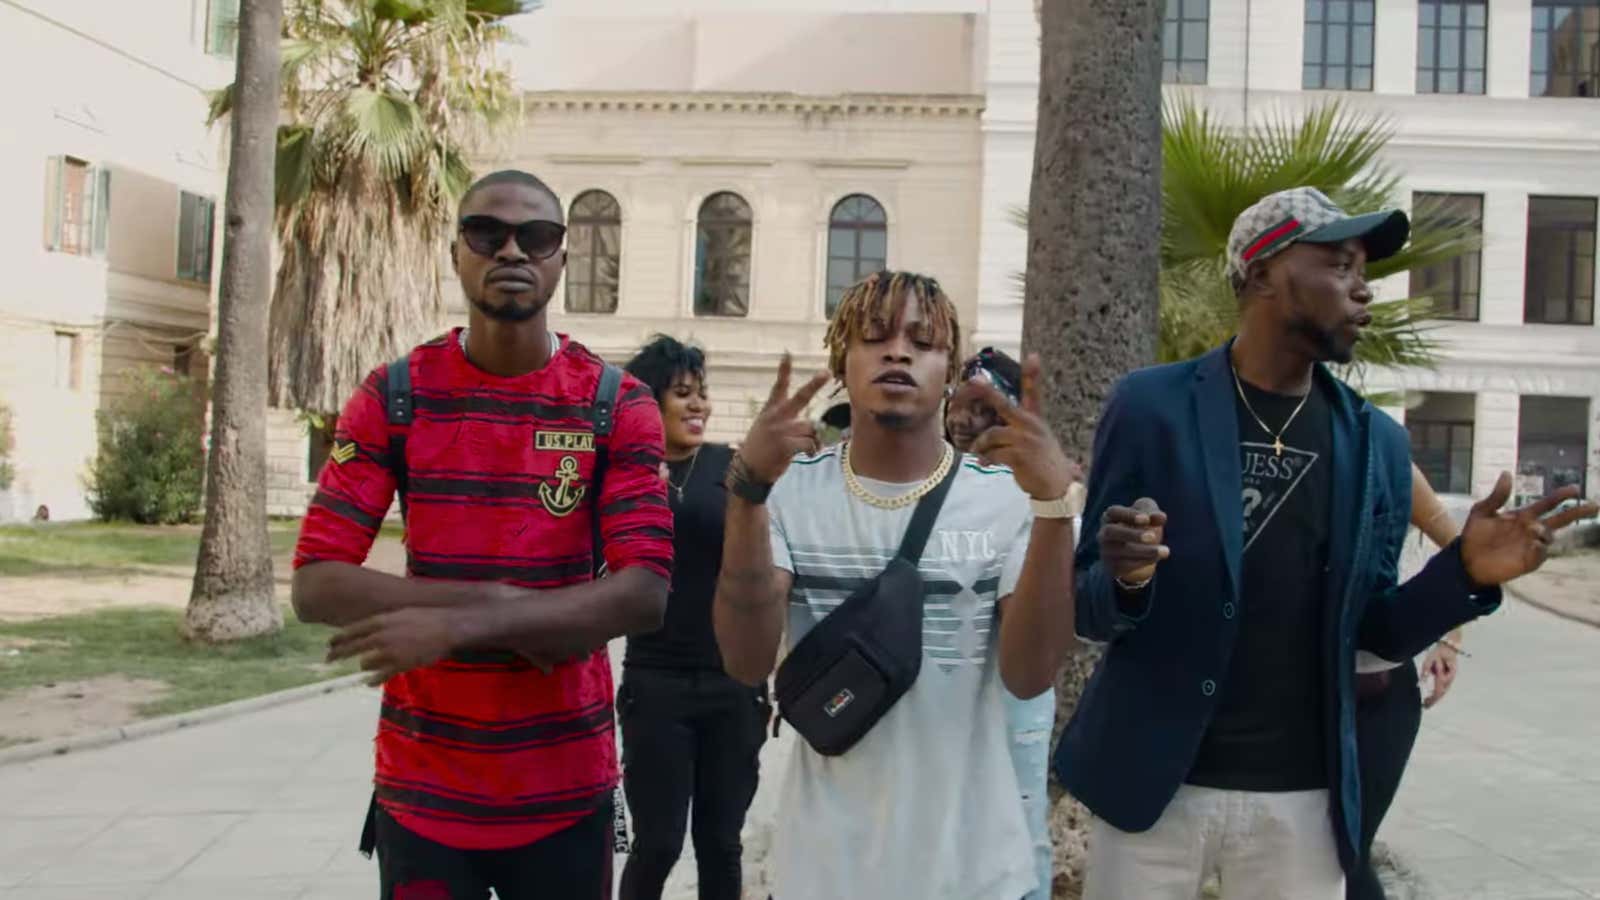 Palermo-based Afrobeats artist RayJeezy (center) in the music video for “Royalty Pt. 2,” featuring Oritsefemi.